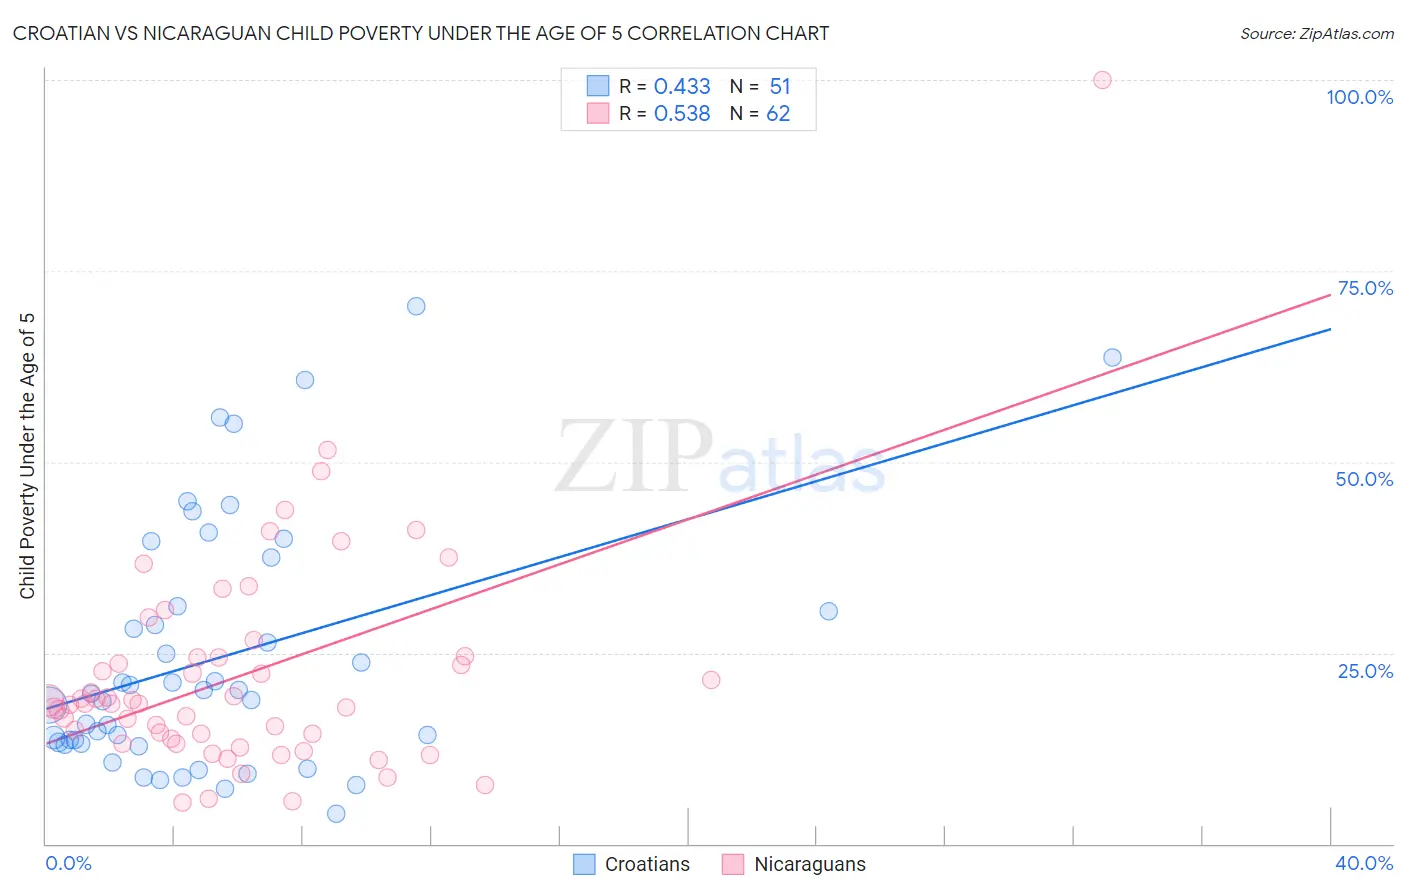 Croatian vs Nicaraguan Child Poverty Under the Age of 5